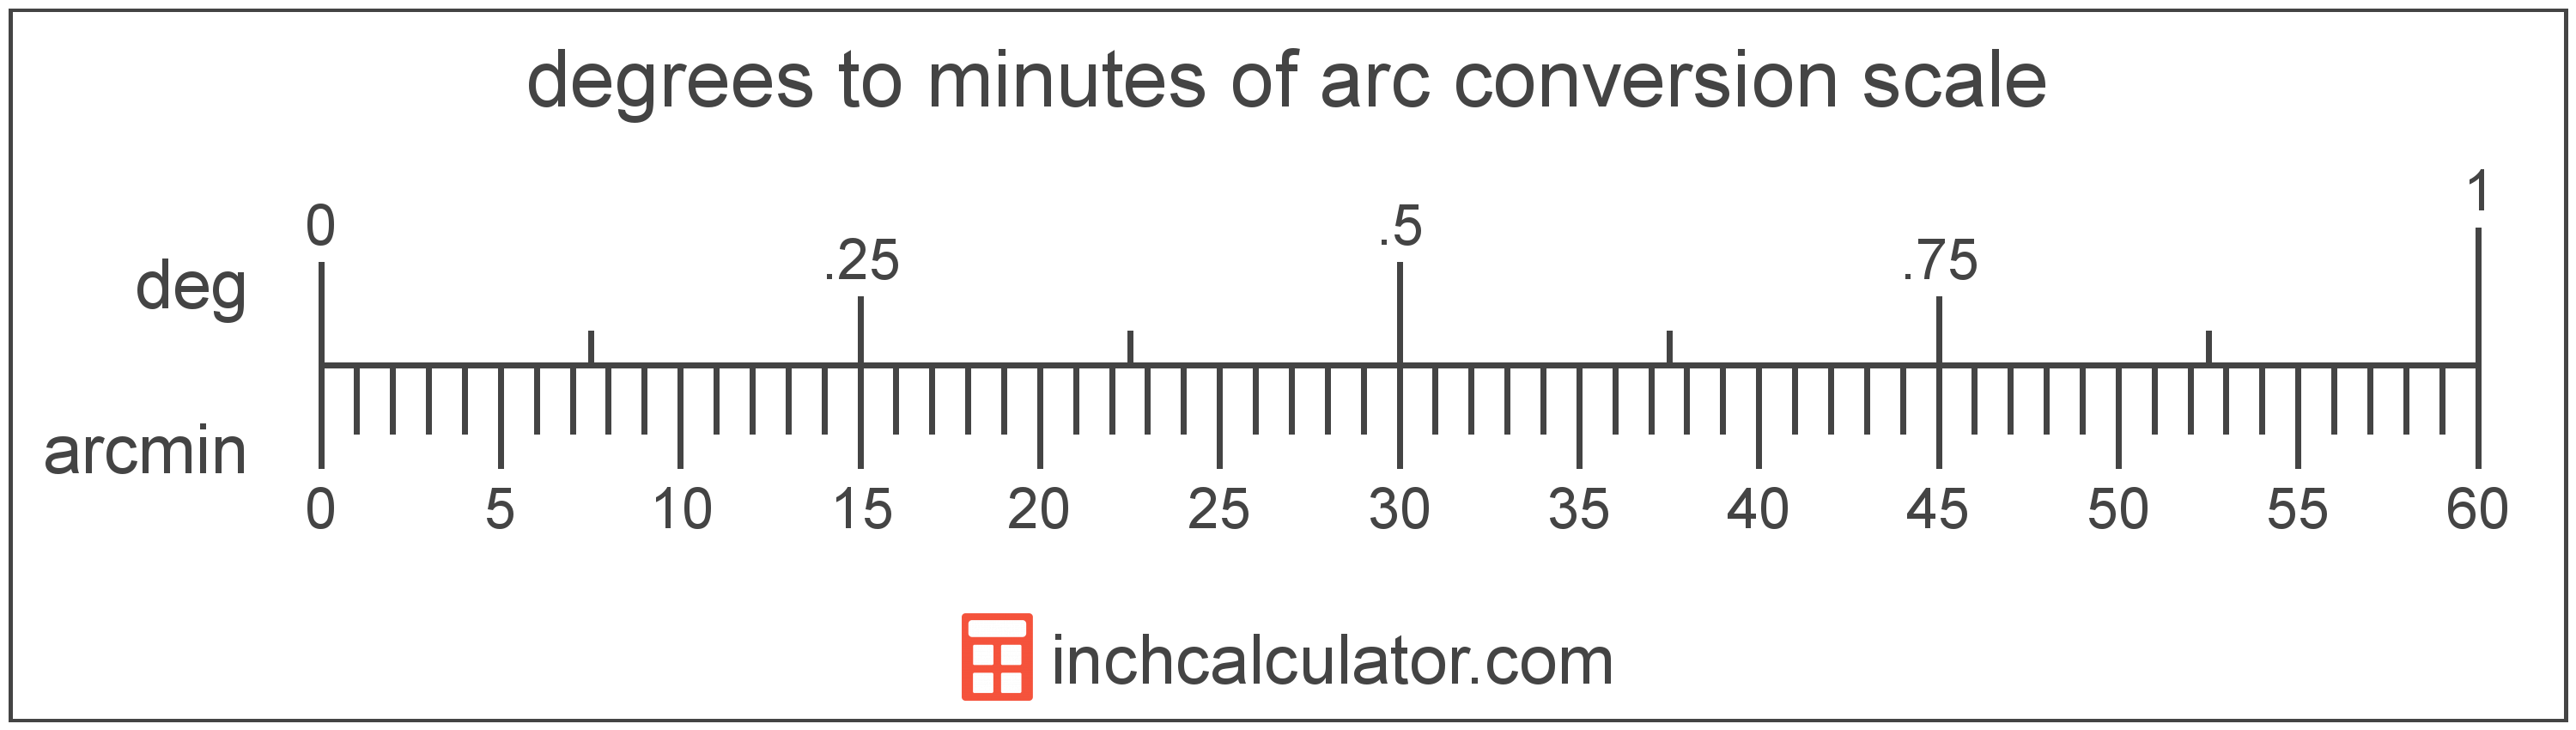 conversion scale showing minutes of arc and equivalent degrees angle values